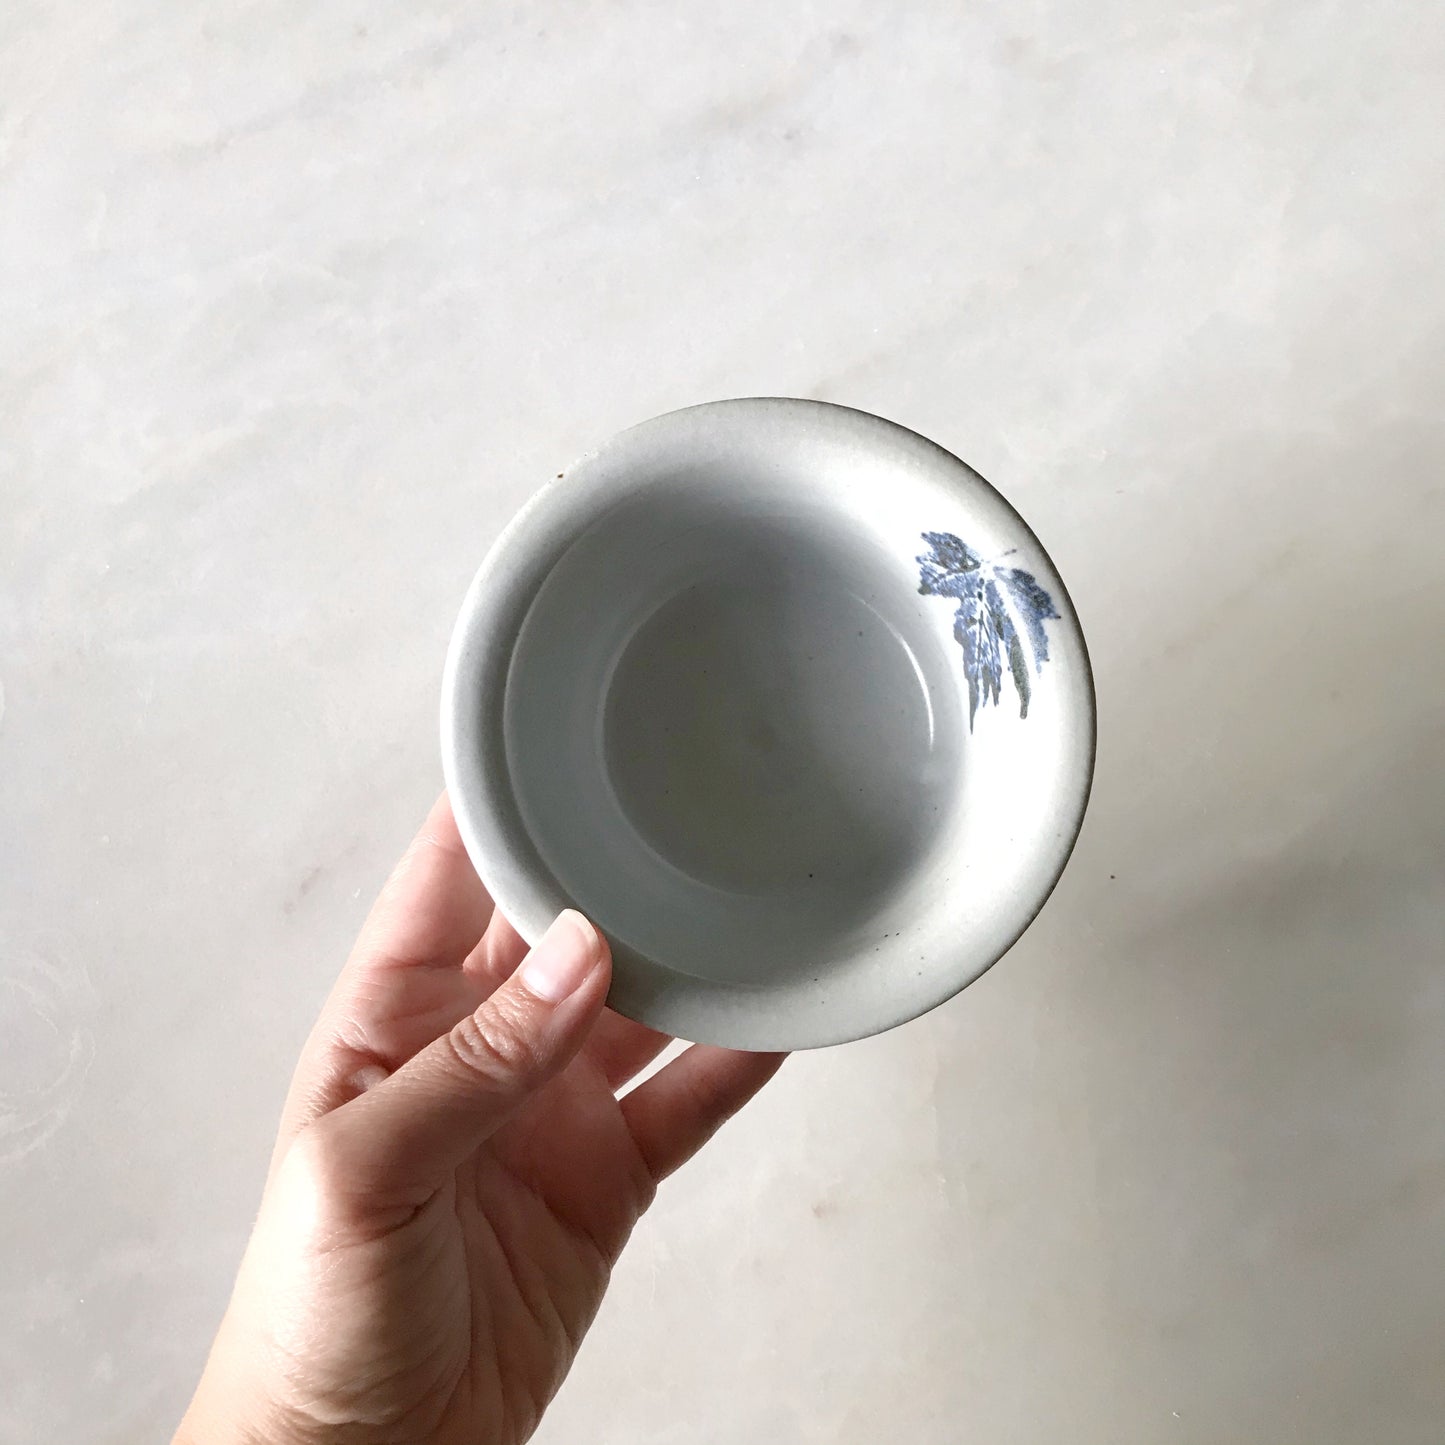 Pottery Dish with Leaf